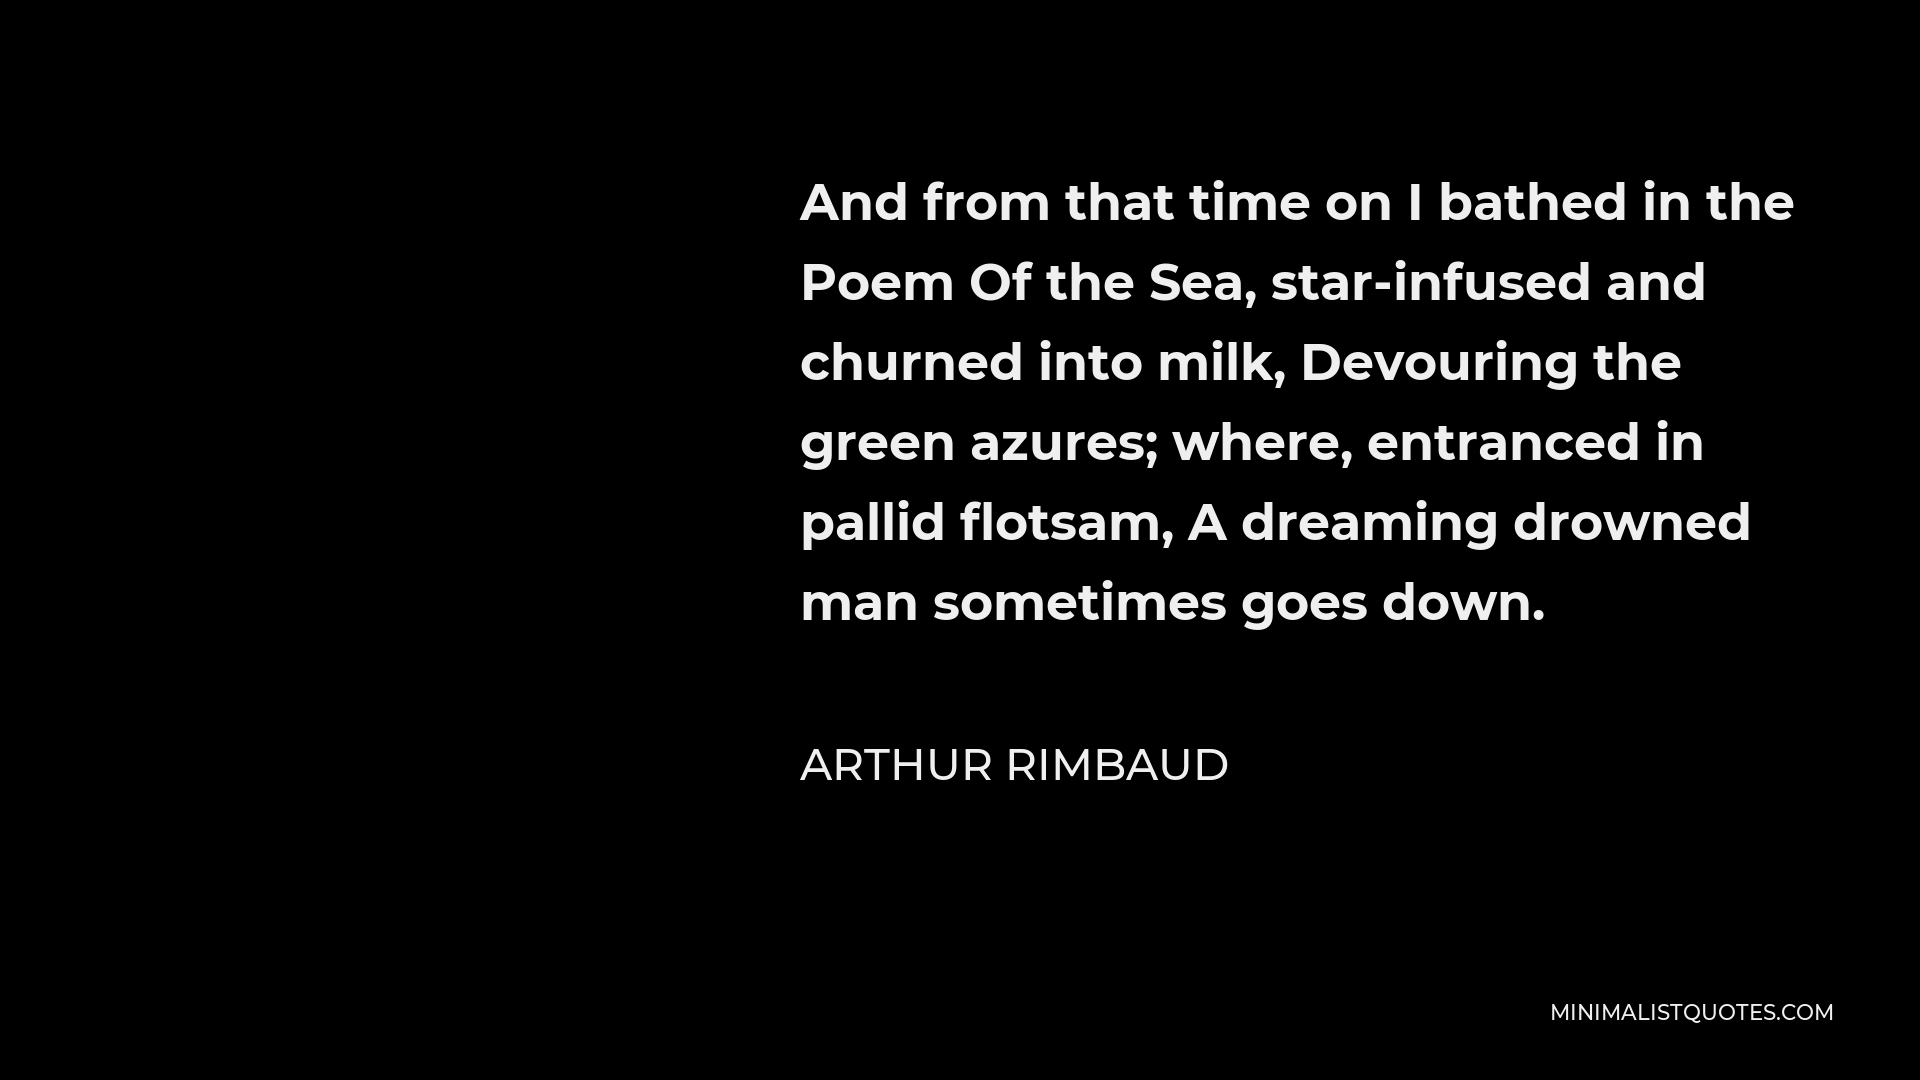 Arthur Rimbaud Quote - And from that time on I bathed in the Poem Of the Sea, star-infused and churned into milk, Devouring the green azures; where, entranced in pallid flotsam, A dreaming drowned man sometimes goes down.